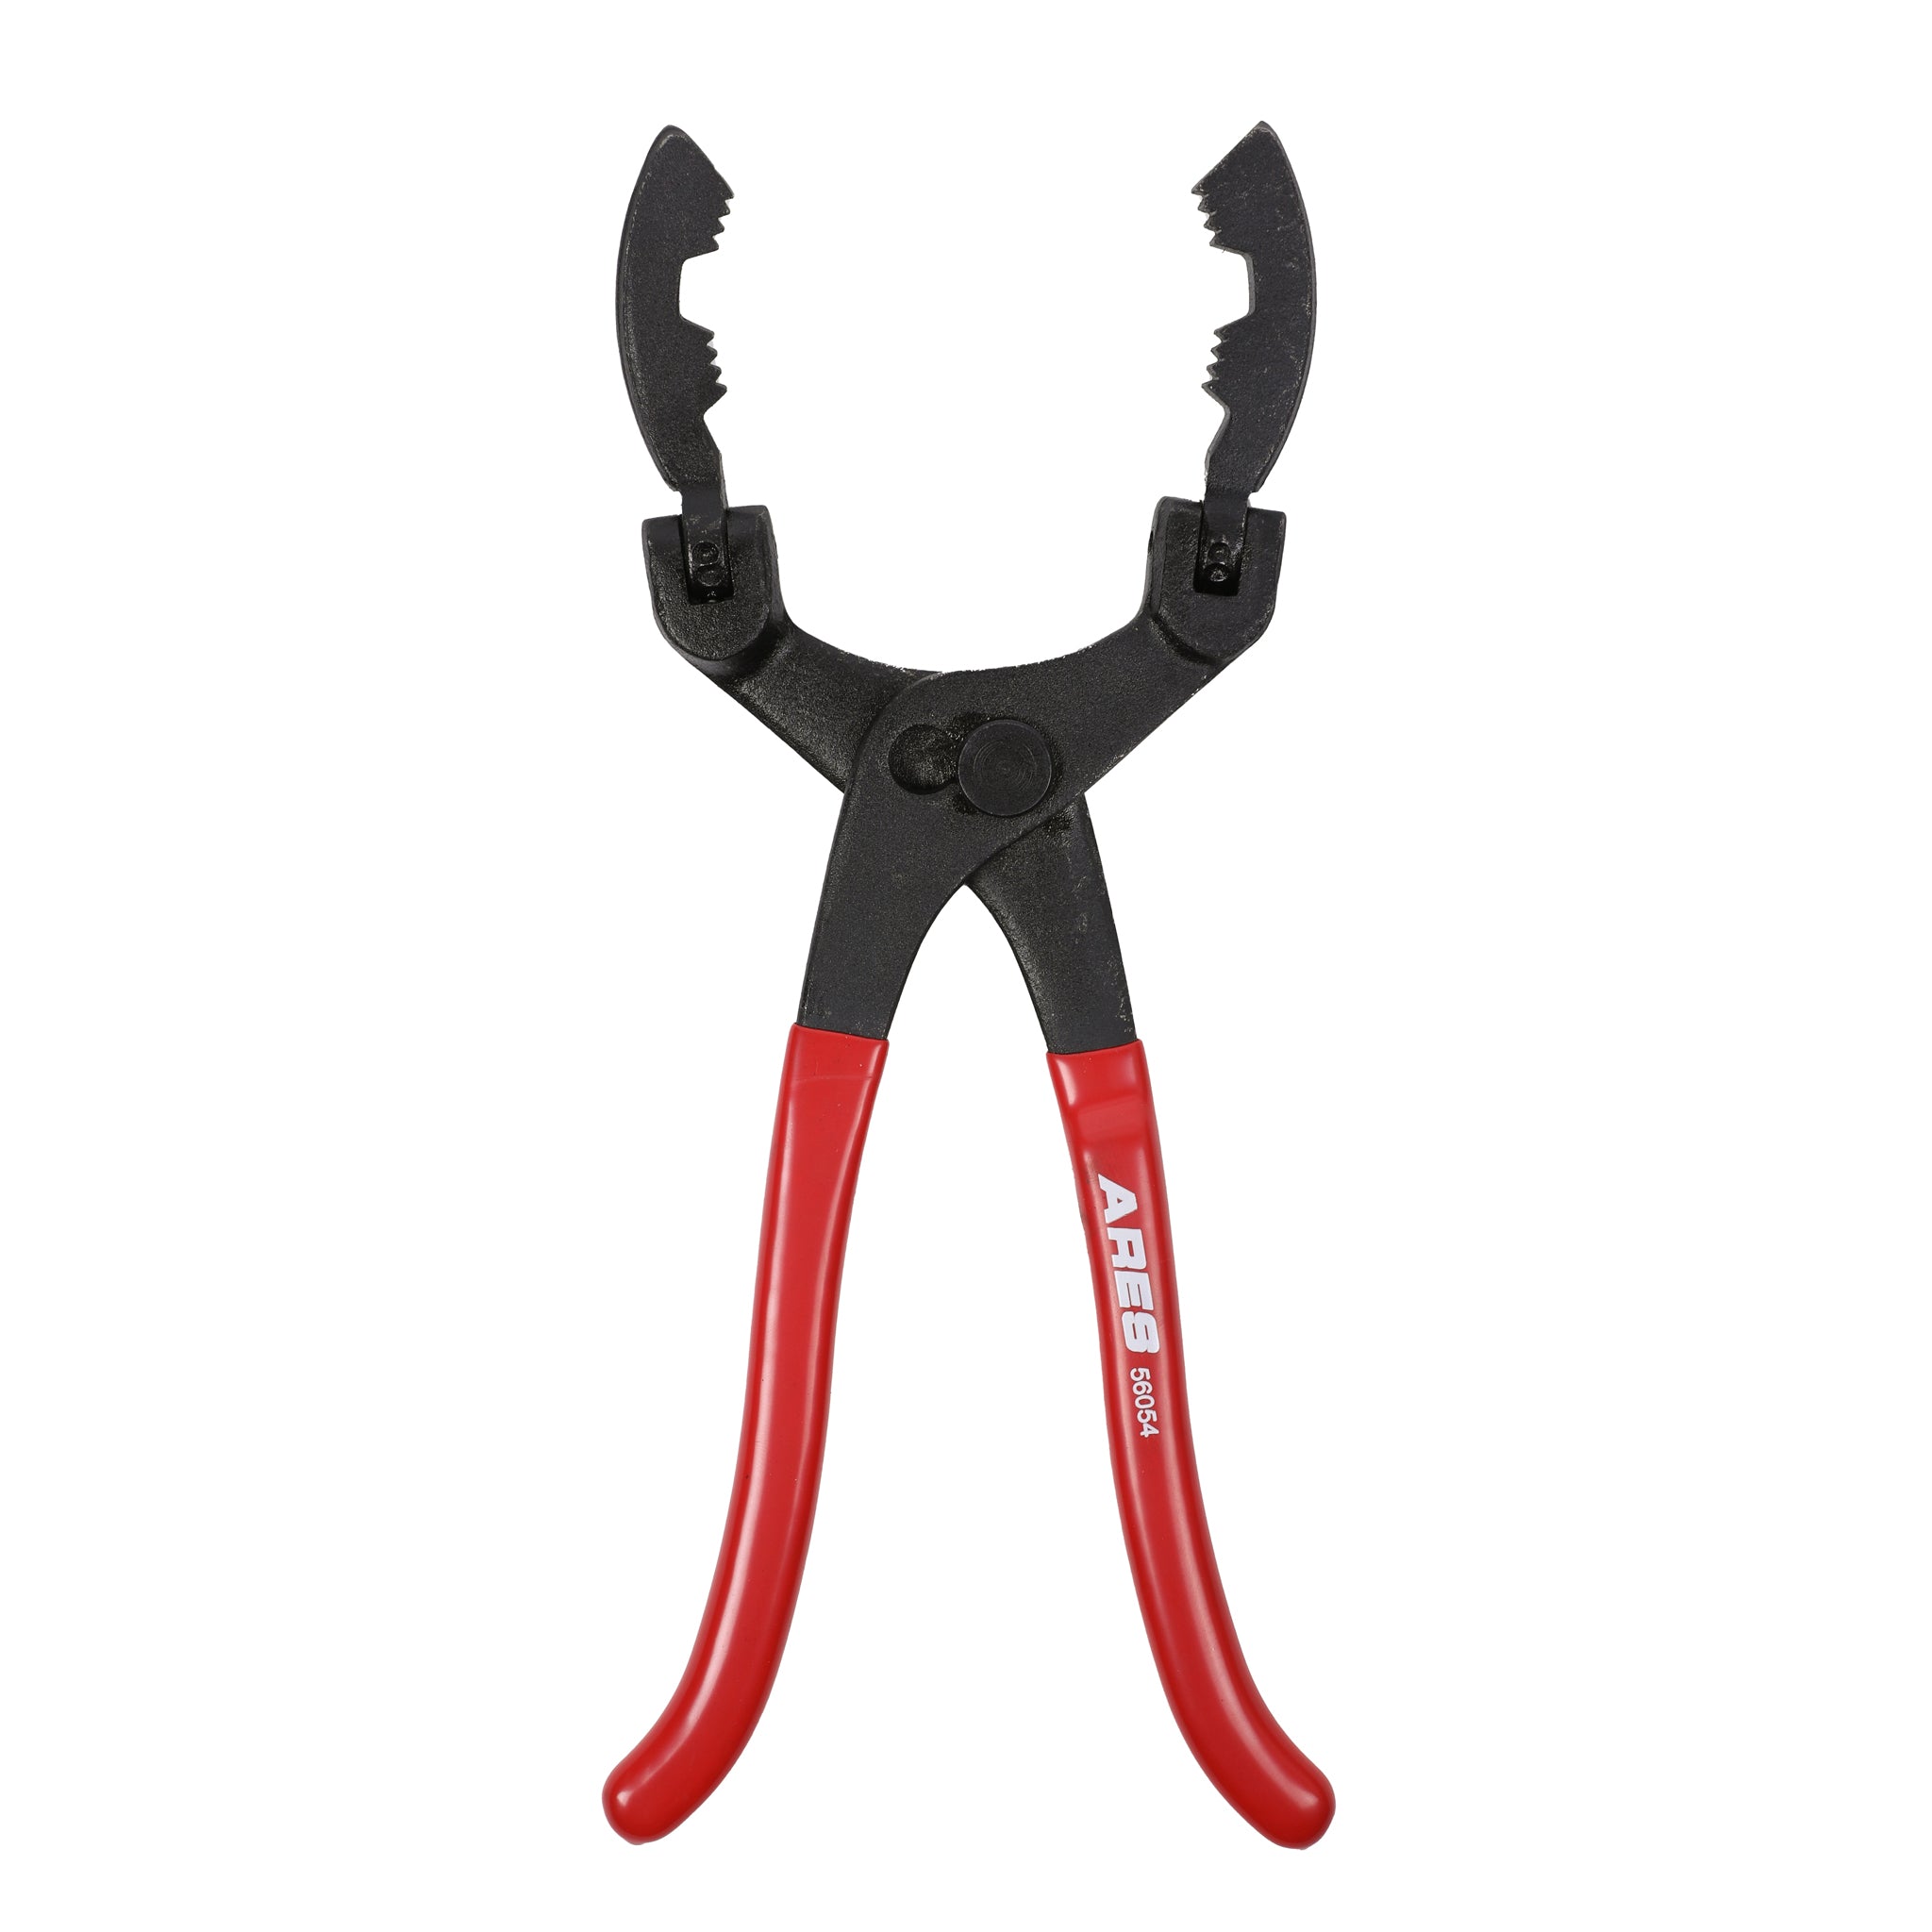 OIL FILTER WRENCH - Pliers Mid – Major Brands Oil